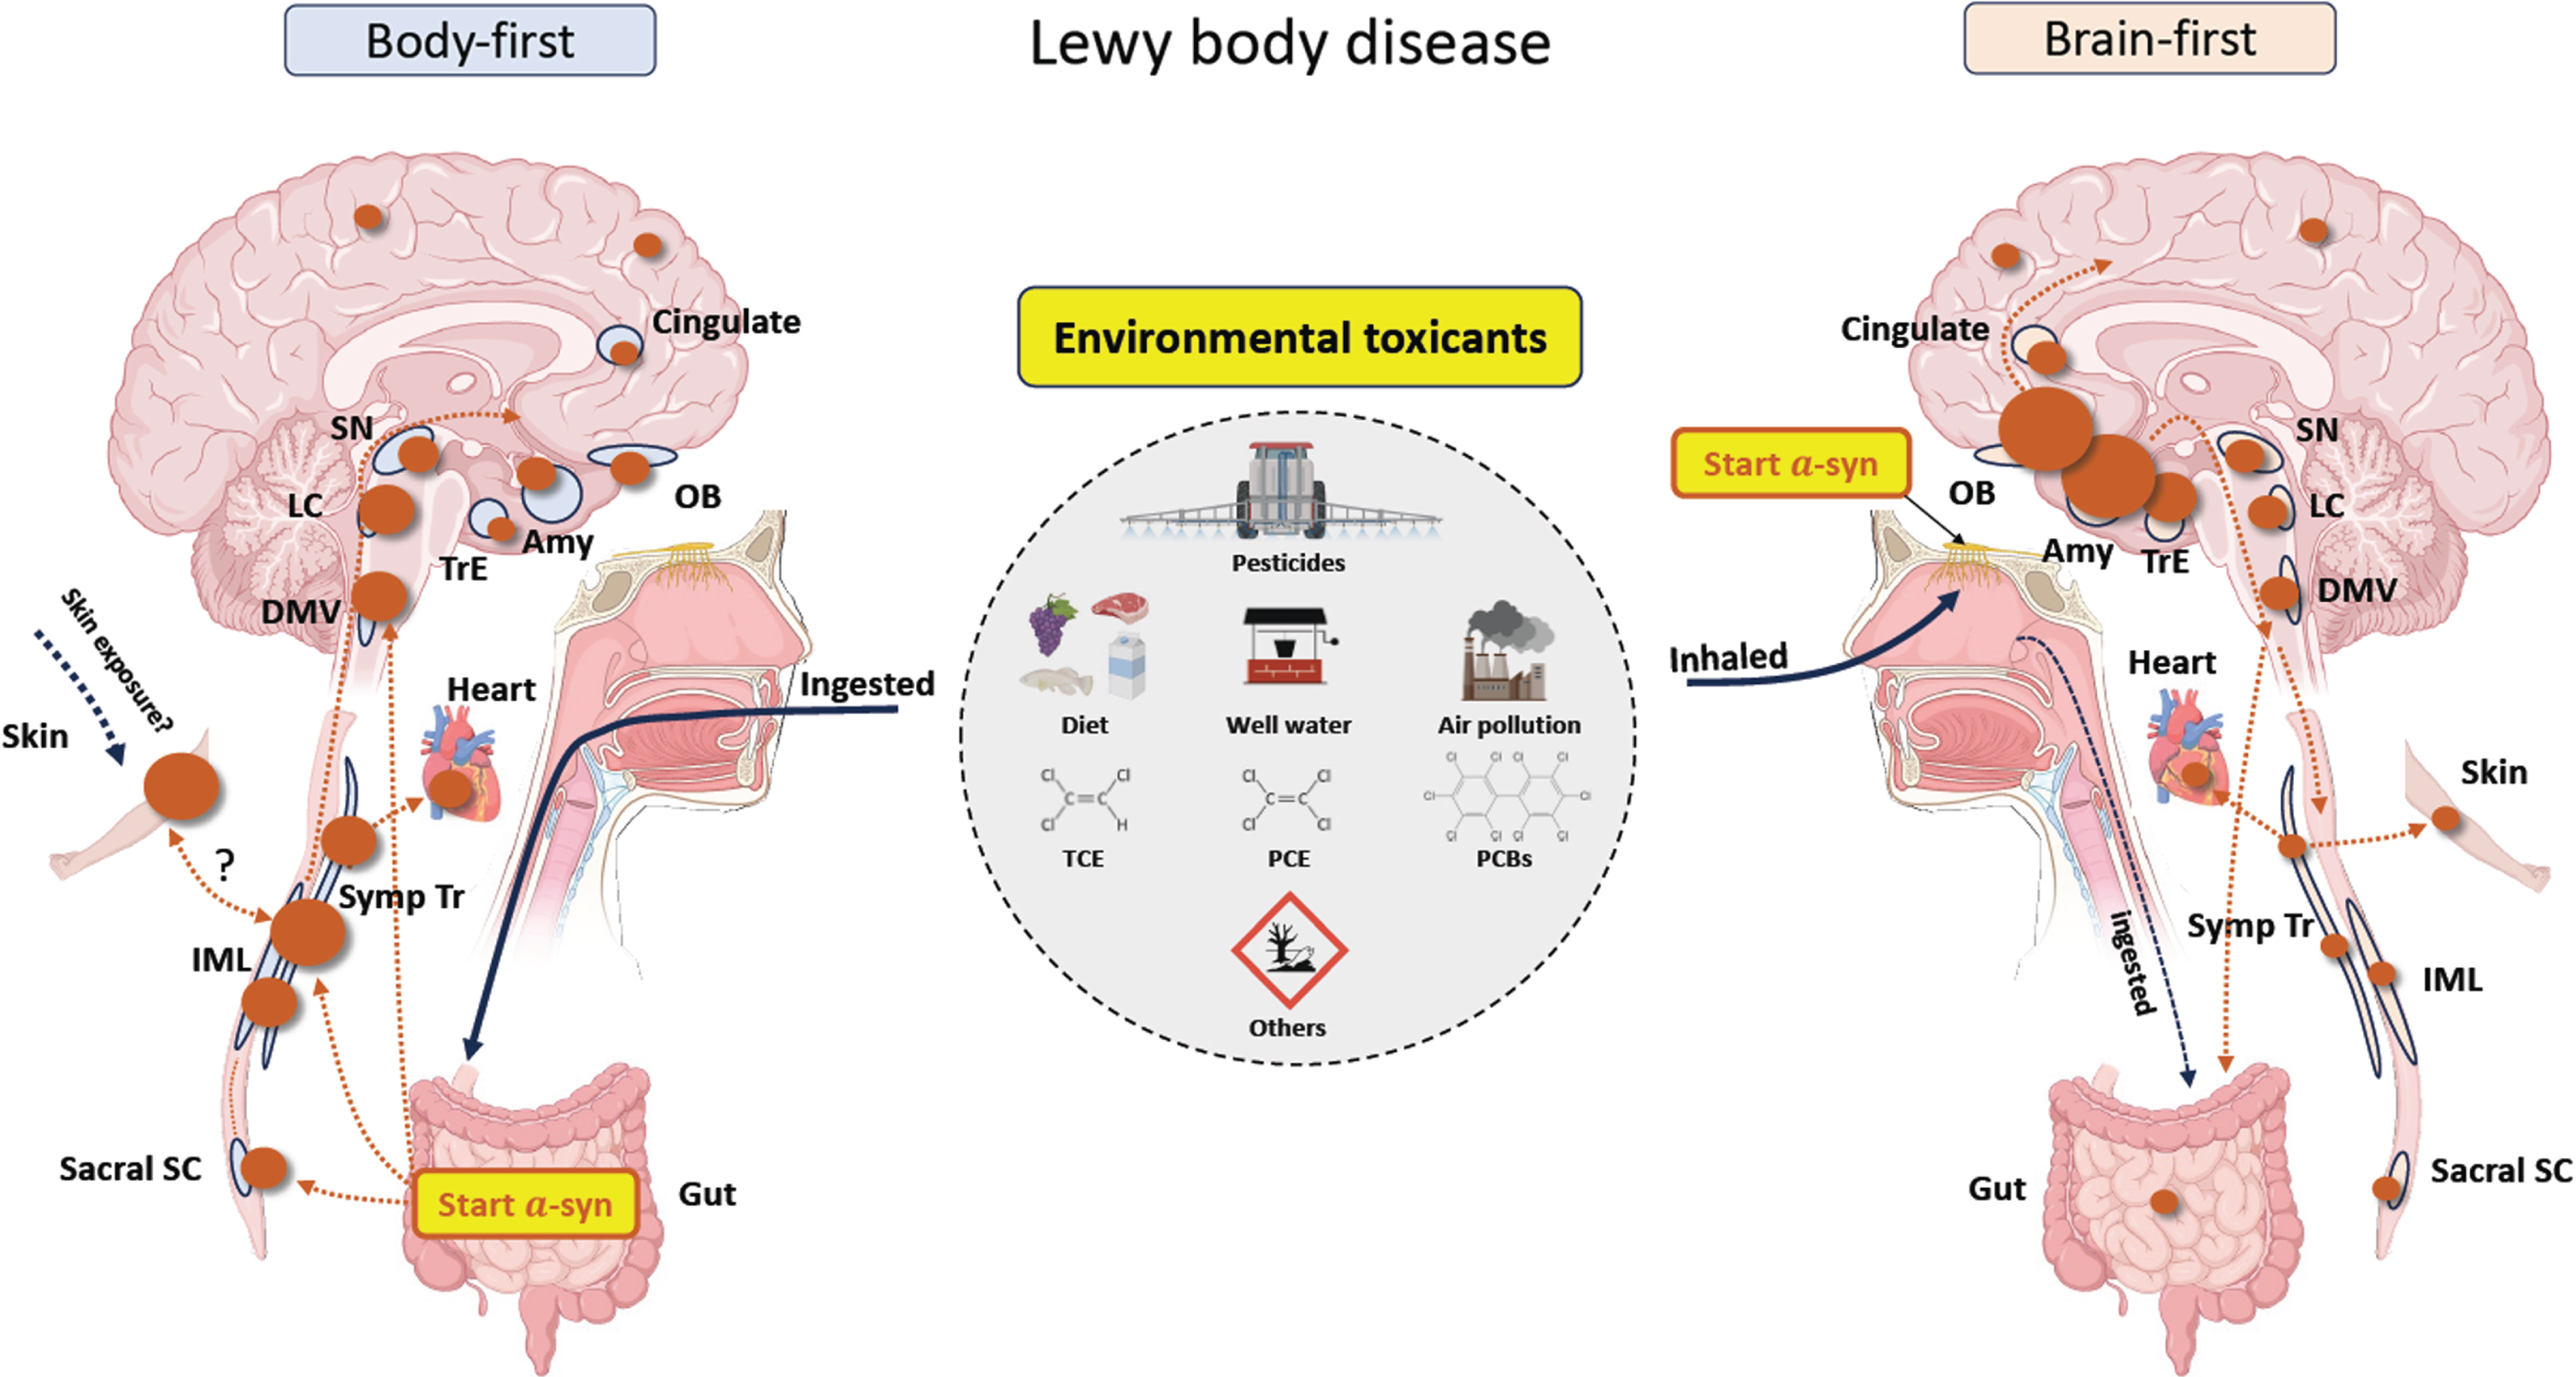 A proposal on how environmental exposure to toxicants may cause either body-first or brain-first Lewy body disease. The size of the brown circles reflects the amount of Lewy pathology in each region. In body-first Lewy body disease, toxicants are most likely ingested through diet and drinking water, but swallowing inhaled toxicants trapped in mucous is also a possibility. In the gut, the toxicants trigger initial a-synuclein misfolding in the enteric nervous system, which then spread centripetally towards the central nervous system via parasympathetic and sympathetic neurons. Consequently, a-synuclein in the peripheral autonomic nervous system and brainstem will be dominating, and less pathology will be found in more rostral structures. The skin could be an alternative trigger site for body-first Lewy body disease. In brain-first Lewy body disease, inhaled toxicants may trigger initial pathology in the olfactory bulb, with subsequent spread to closely related structures. Consequently, a-synuclein in amygdala and olfactory-related structures such as the transentorhinal cortex display most pathology, and less will be found in the brainstem and peripheral autonomic nervous system. Sacral SC, sacral spinal cord; IML, intermediolateral column; Symp Tr, sympathetic trunk; DMV, dorsal motor nucleus of vagus; LC, locus coeruleus; SN, substantia nigra; Amy, amygdala; OB, olfactory bulb; TrE, transentorhinal cortex; PCBs, polychlorinated biphenyls; TCE, trichloroethylene; PCE, perchloroethylene.